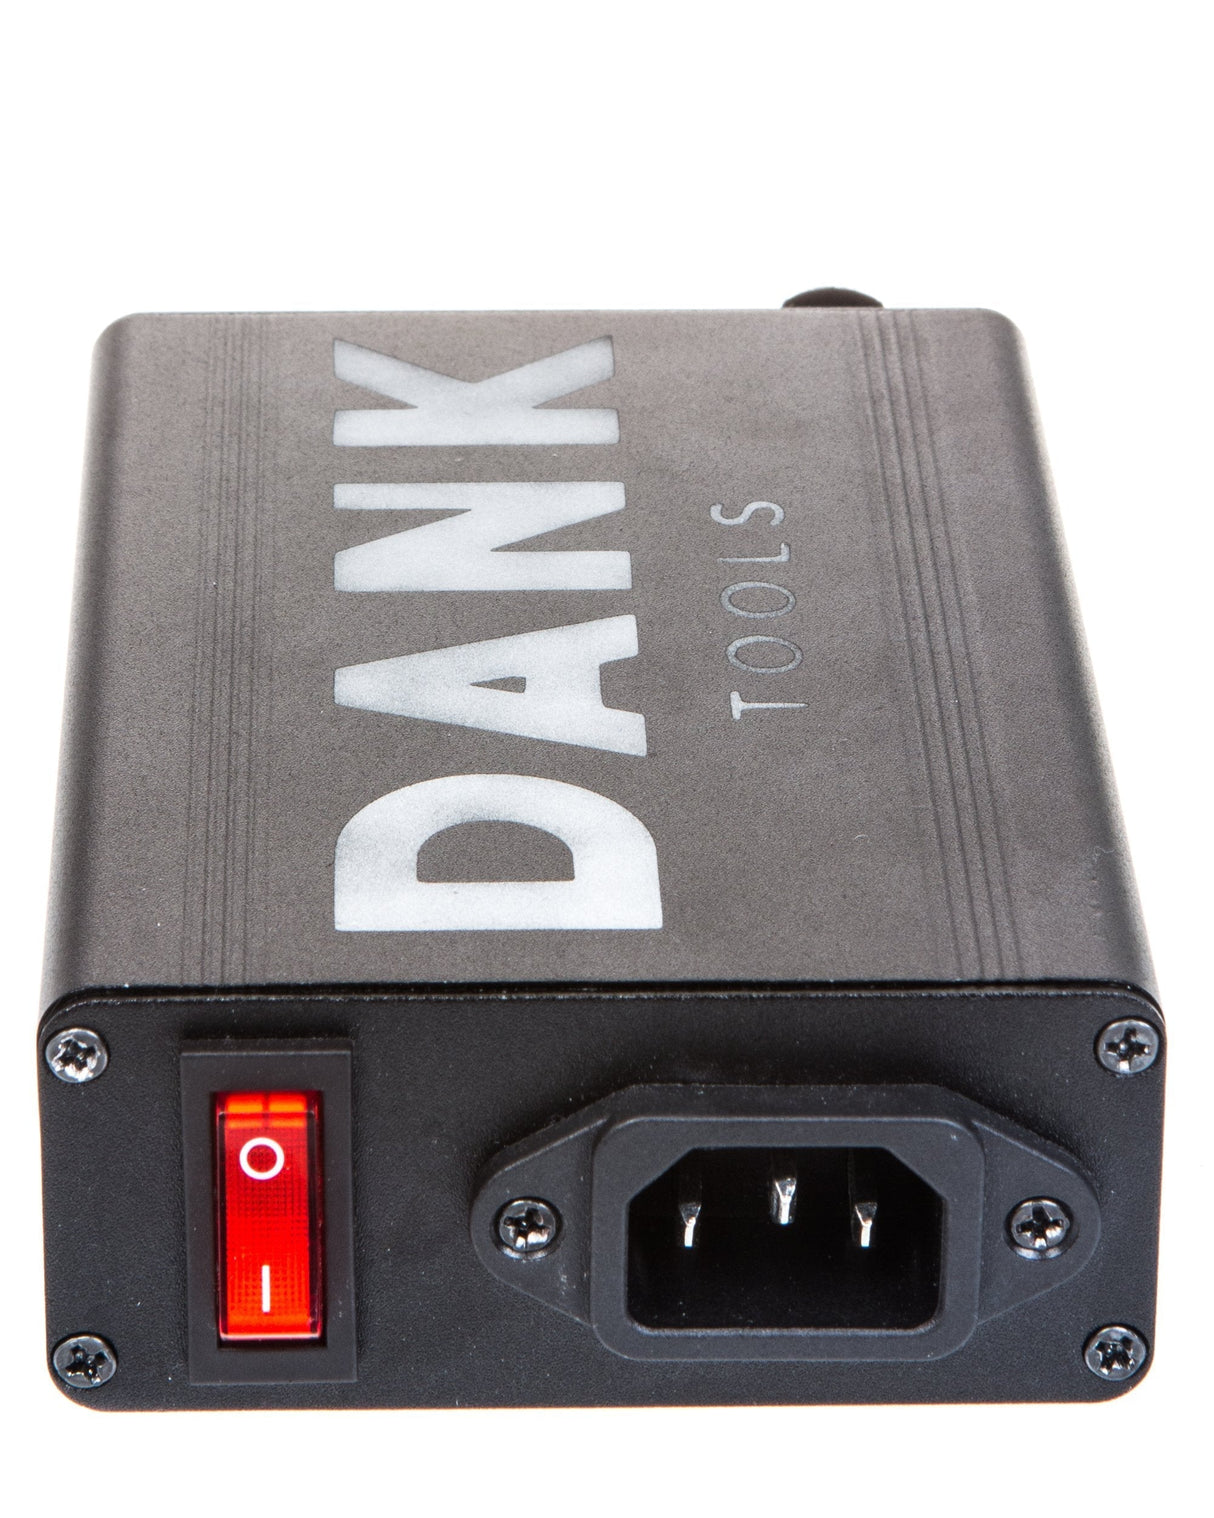 Dank Tools Universal Titanium E-Nail Kit, front view with power switch and plug-in port